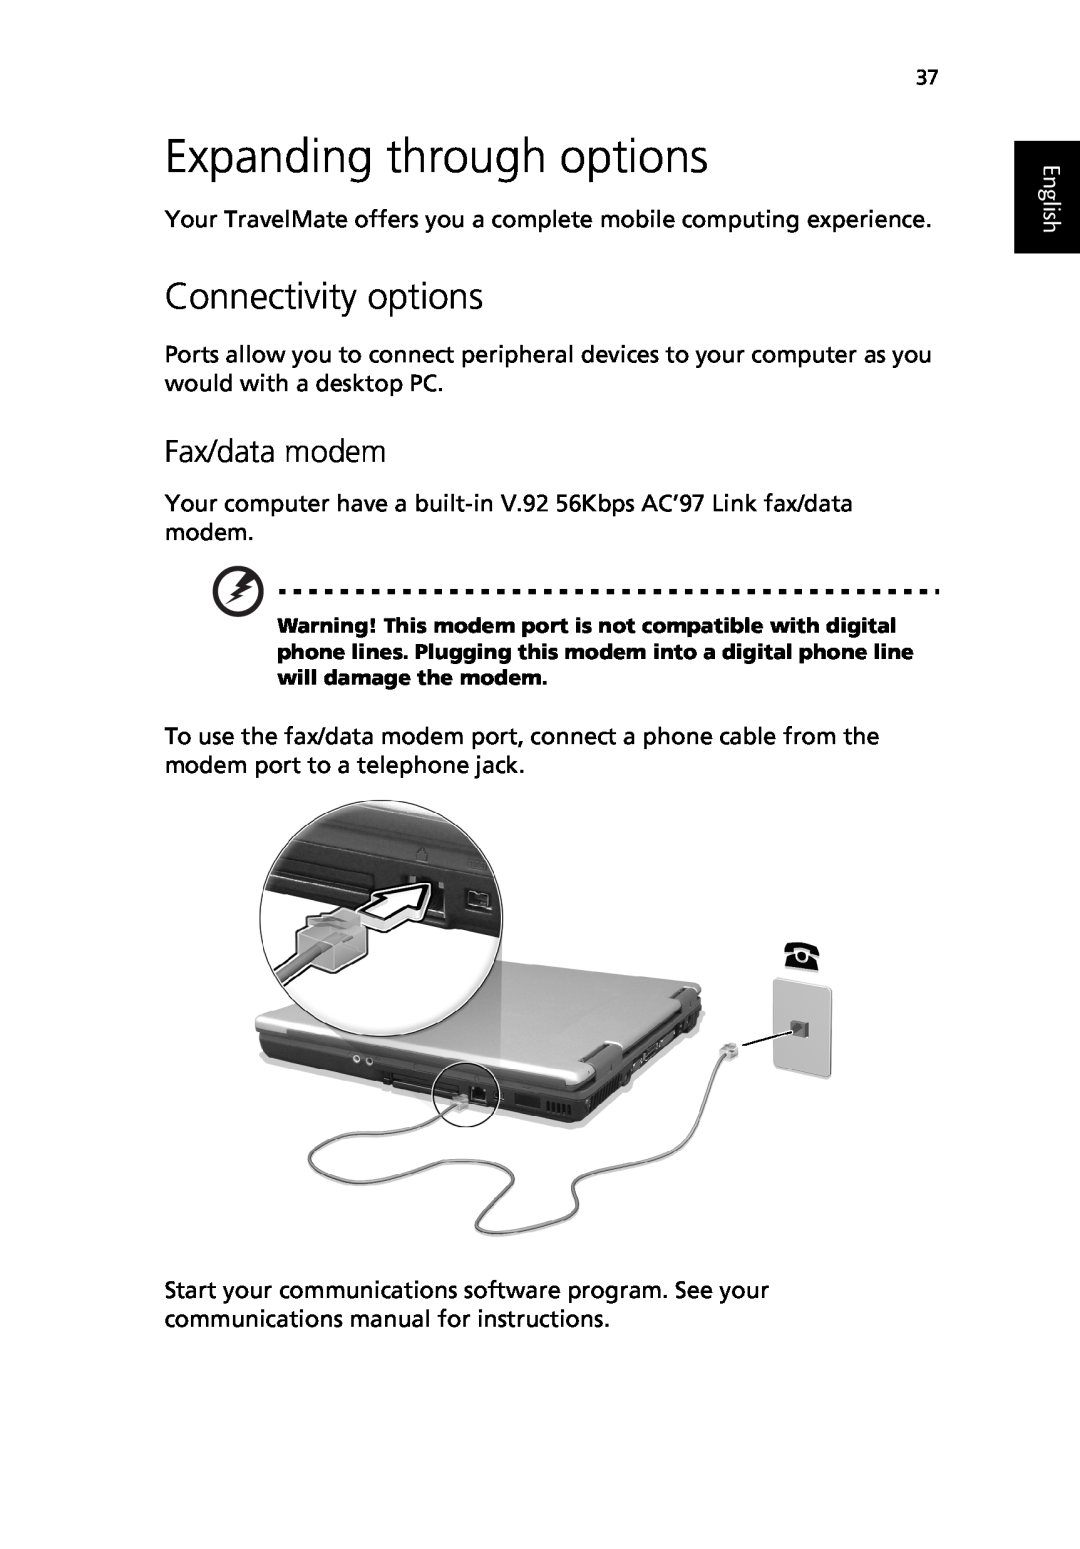 Acer TravelMate 530 manual Expanding through options, Connectivity options, Fax/data modem, English 